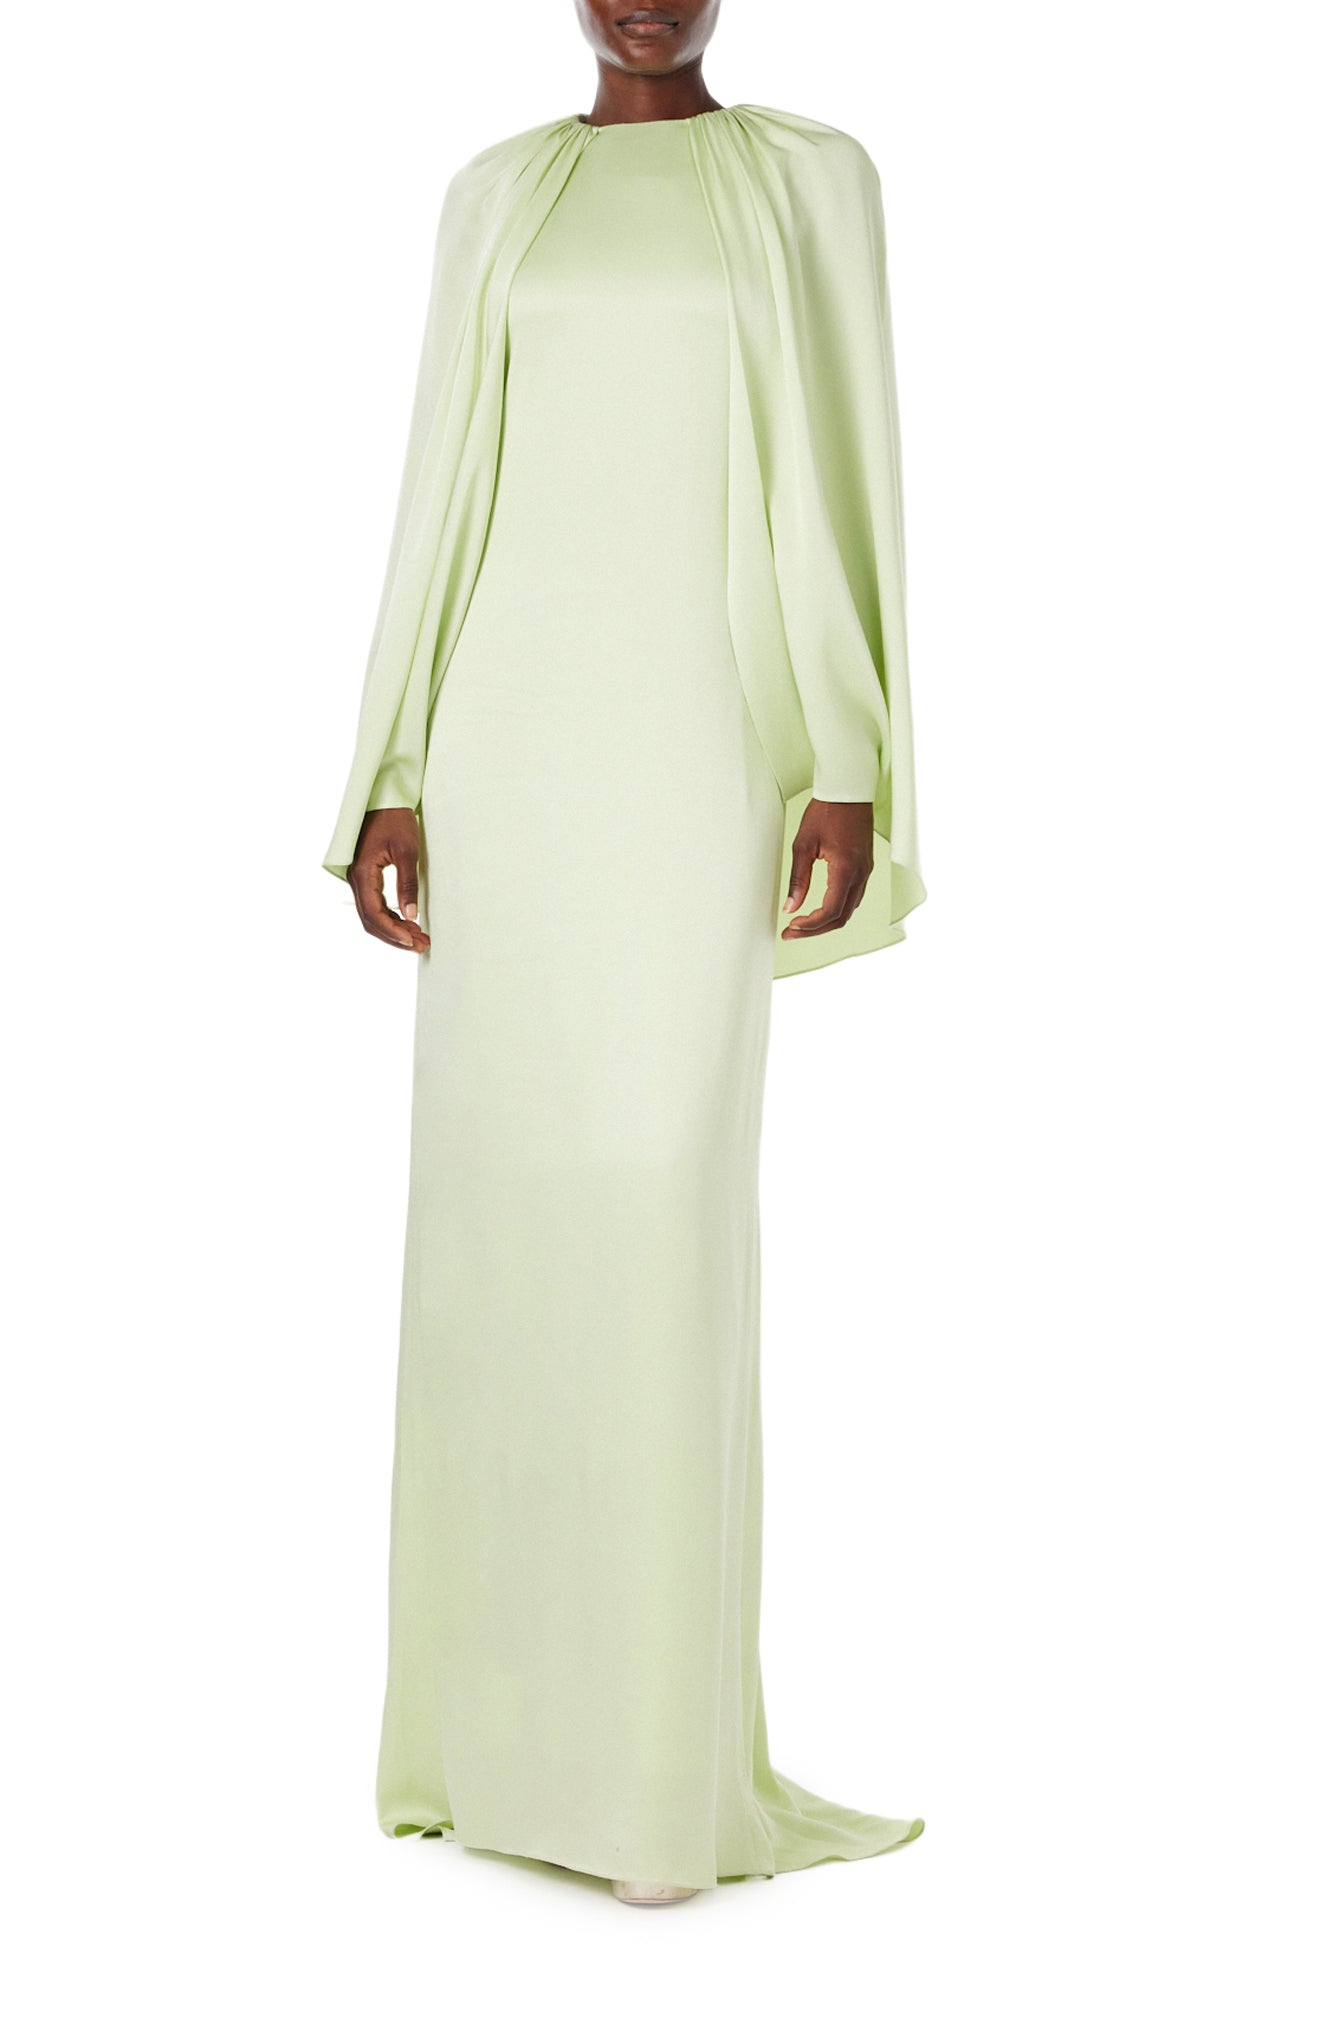 Monique Lhuillier Spring 2024 floor length capelet gown with jewel neckline in honeydew colored crepe back satin - front 2.